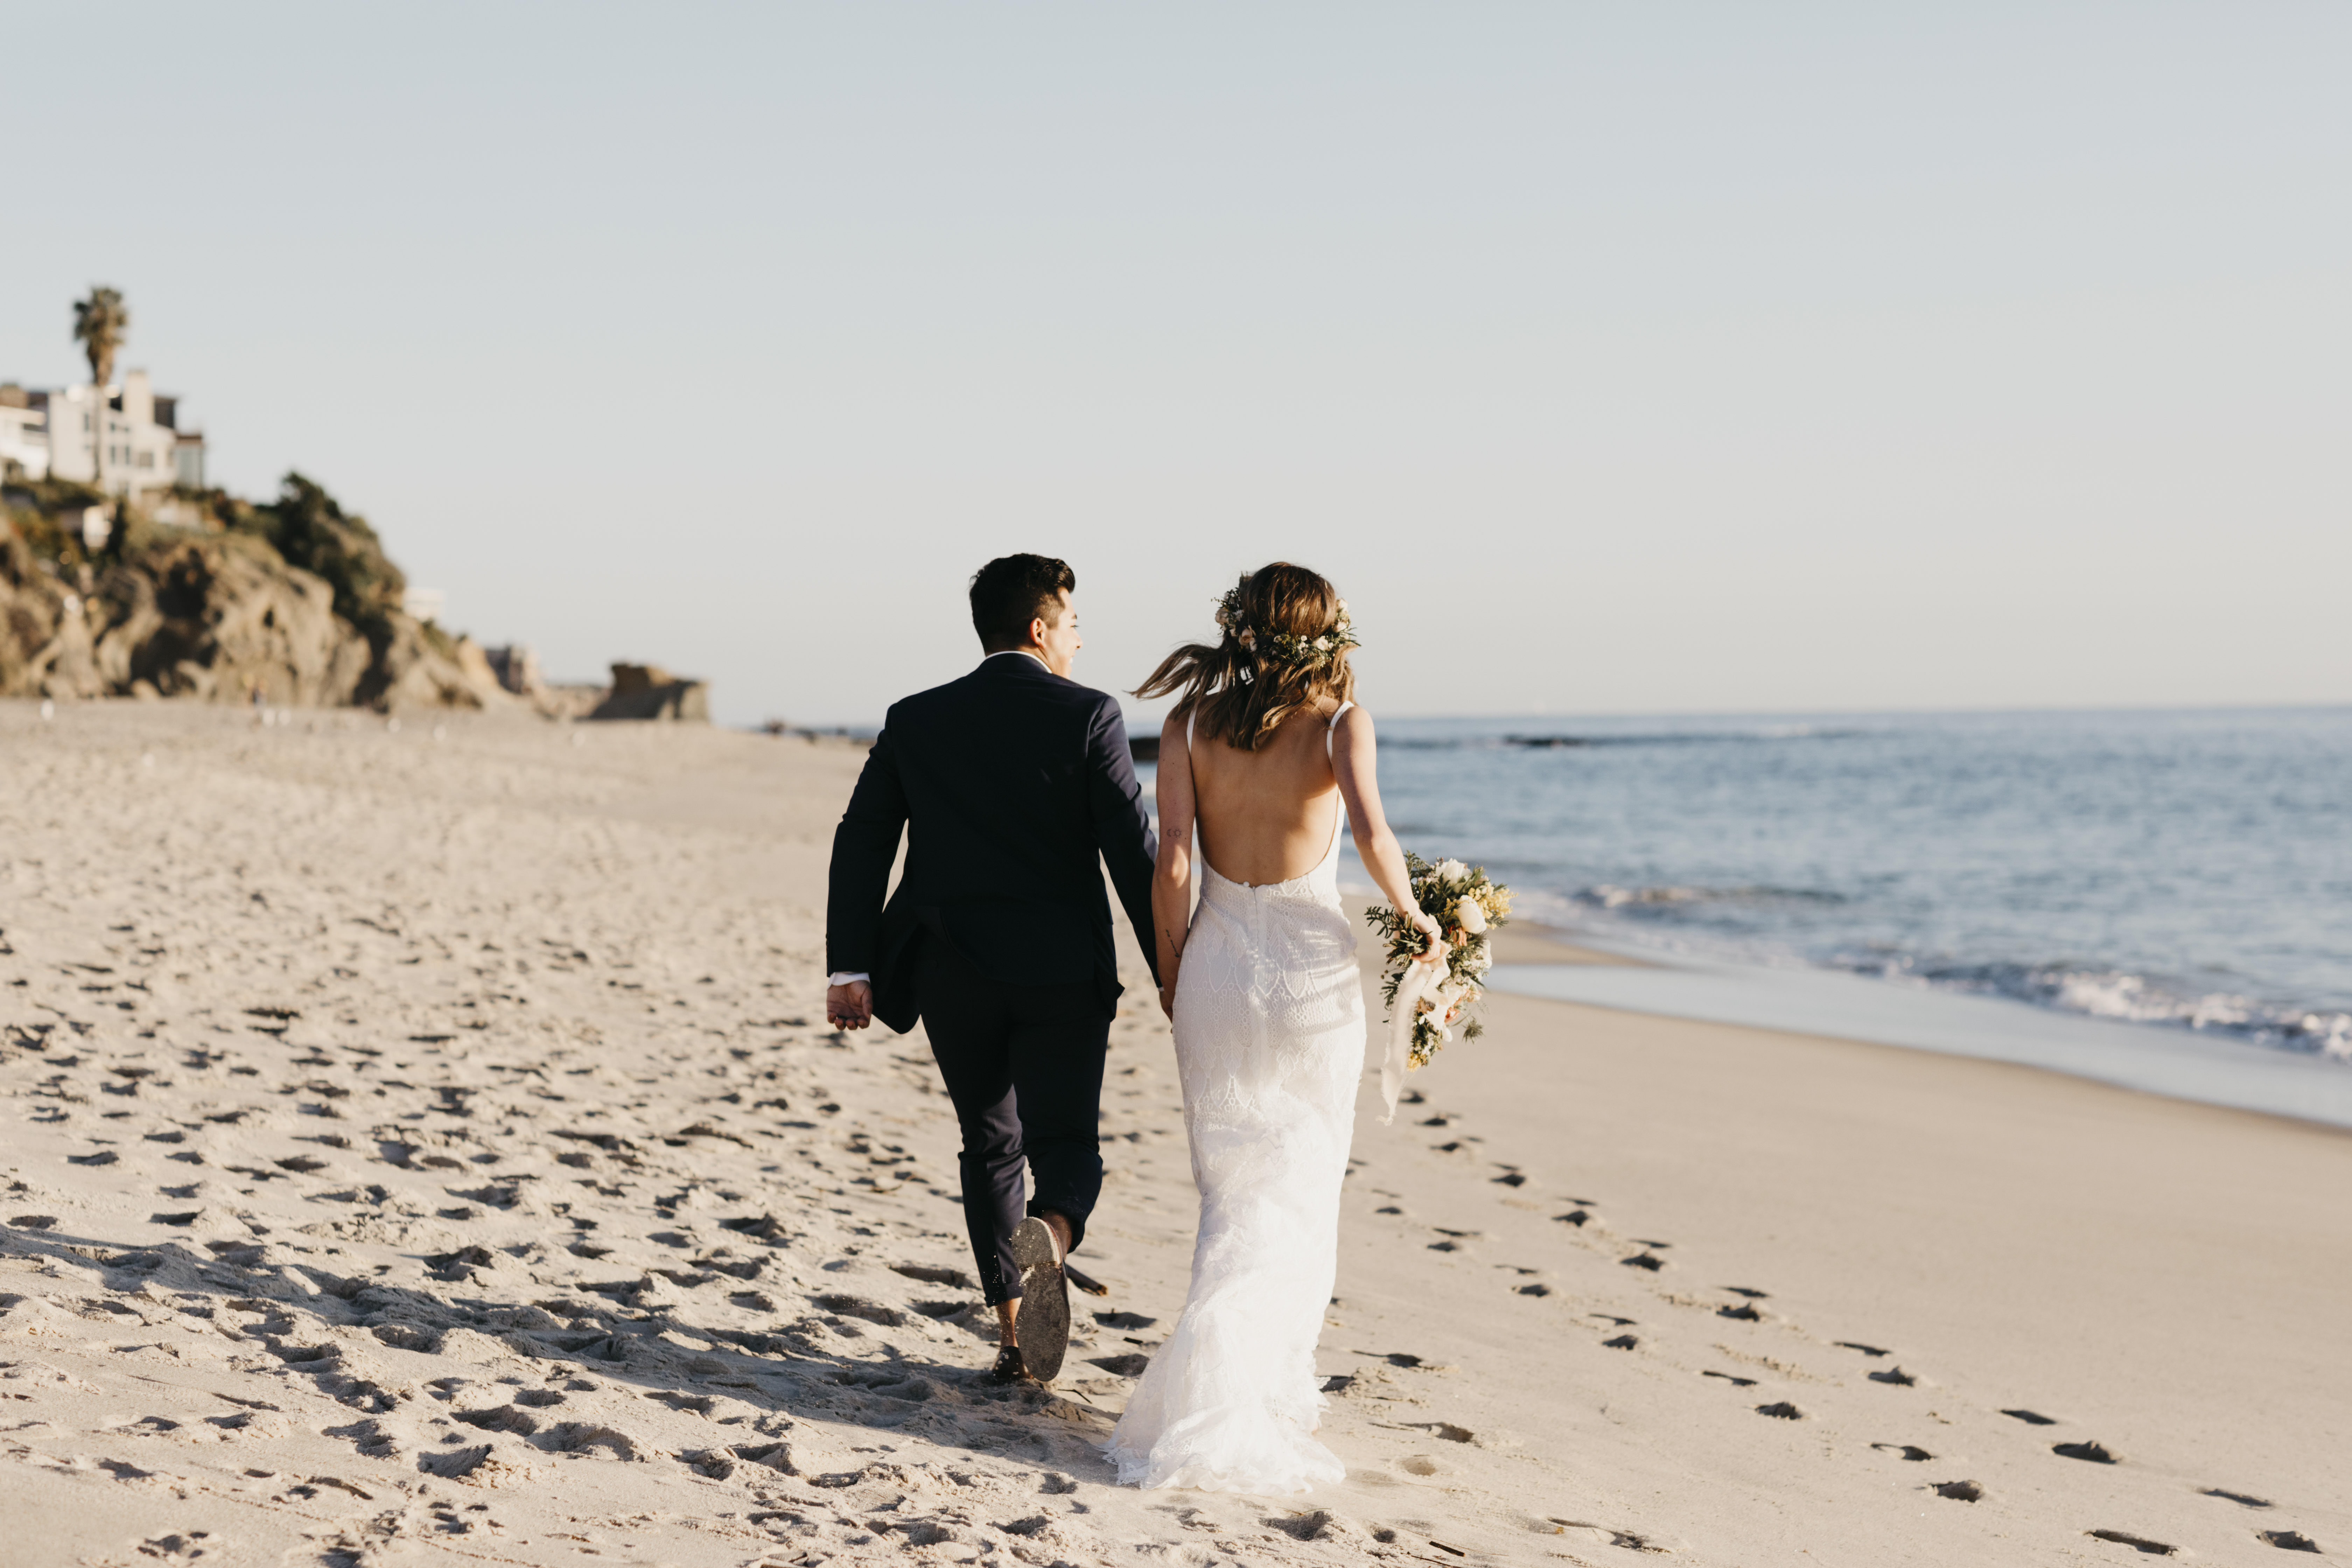 Rear view of happy bridal couple running at the beach | Source: Getty Images